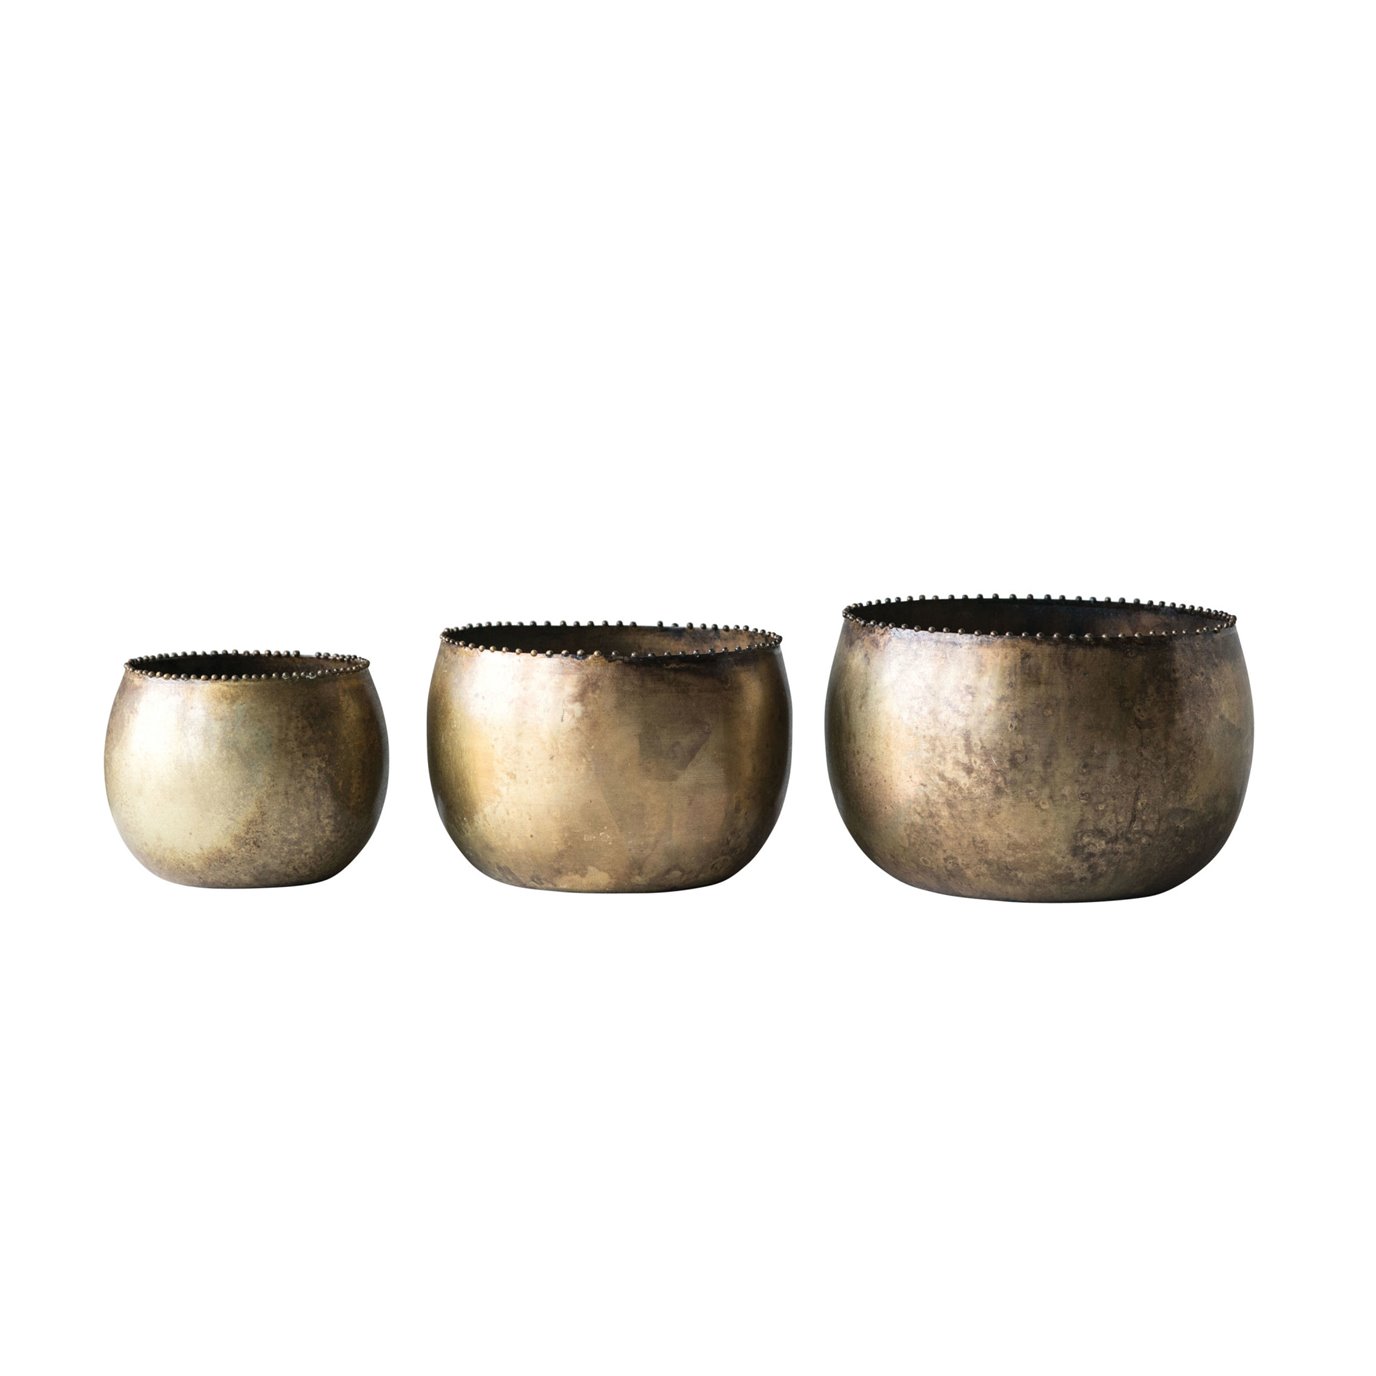 Heavily Distressed Antique Brass Pots with Rim Beading (Set of 3 Sizes)